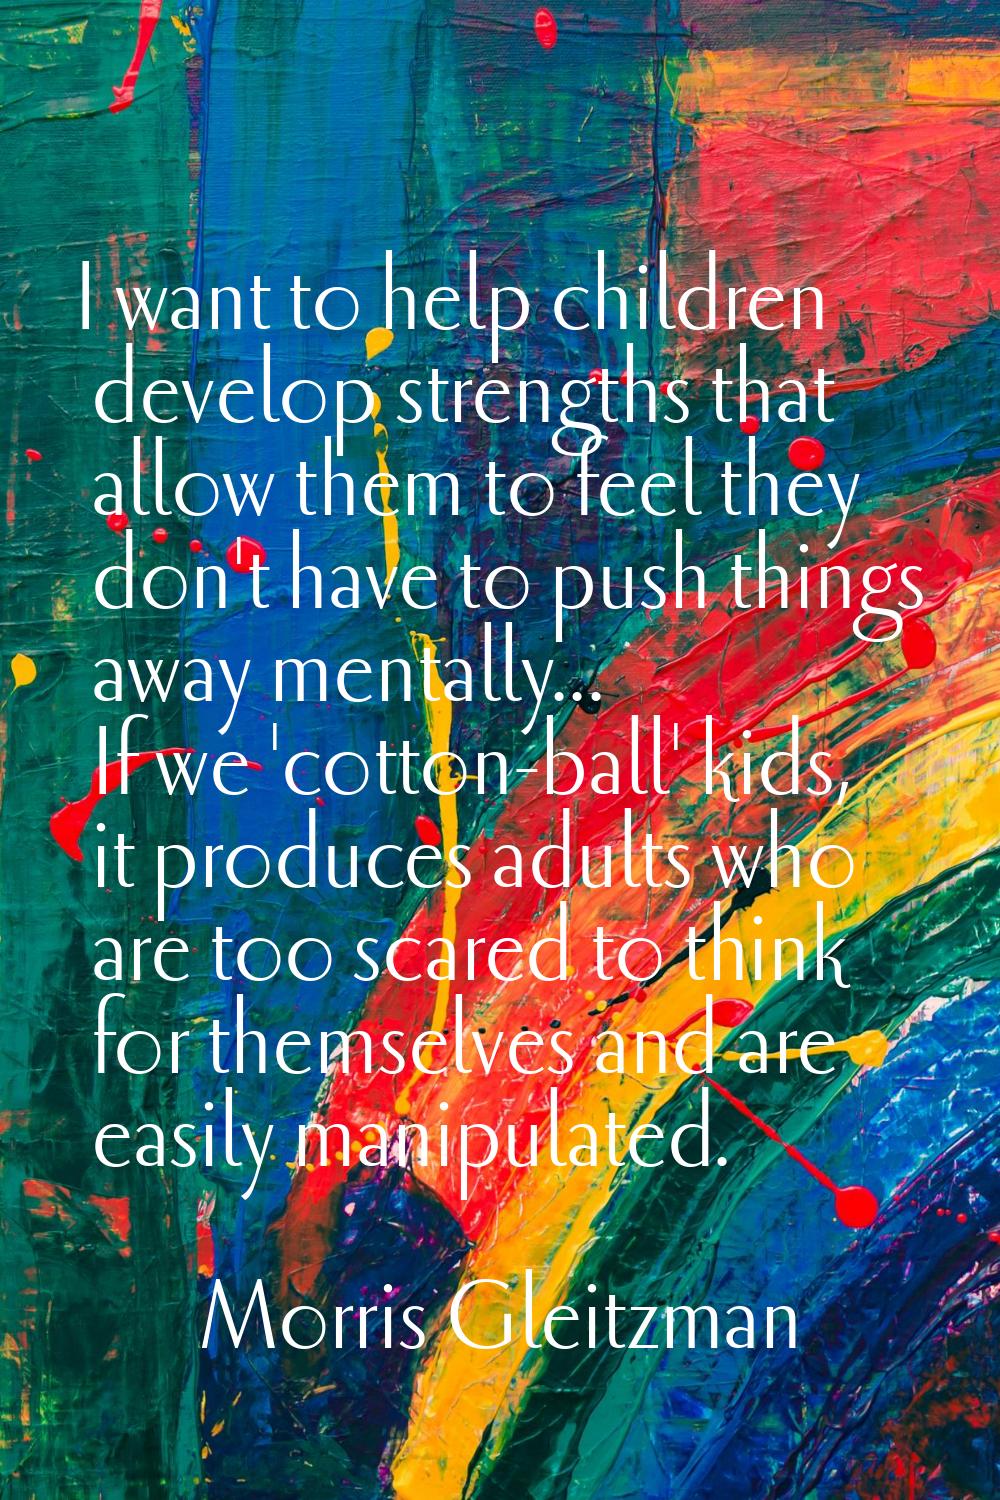 I want to help children develop strengths that allow them to feel they don't have to push things aw